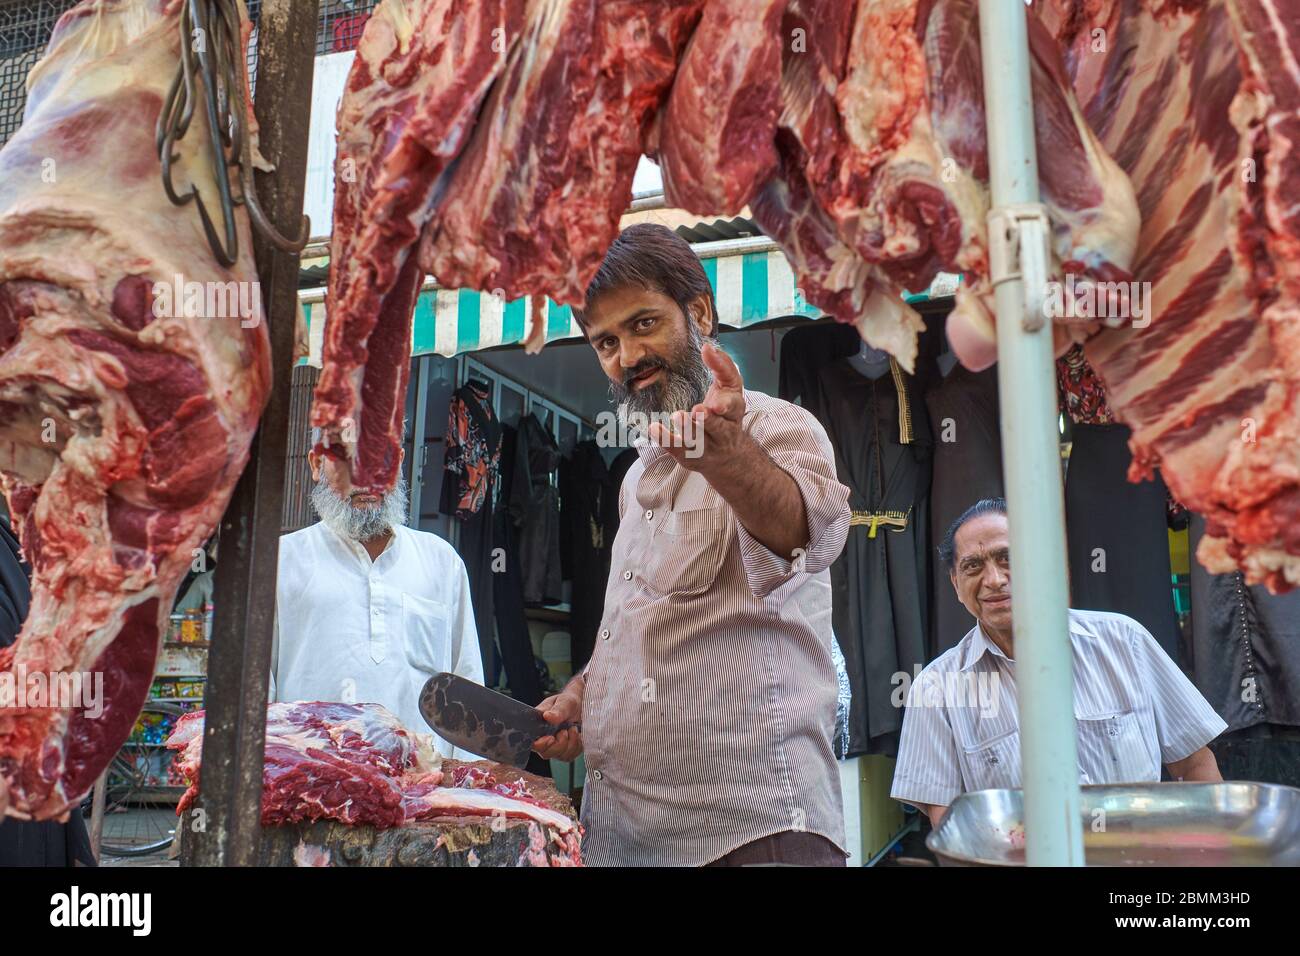 A Muslim butcher in Arab Gali, Grant Rd., Mumbai, India, framed by large chunks of meat & cleaver in hand, gesturing aggressively at the photographer Stock Photo